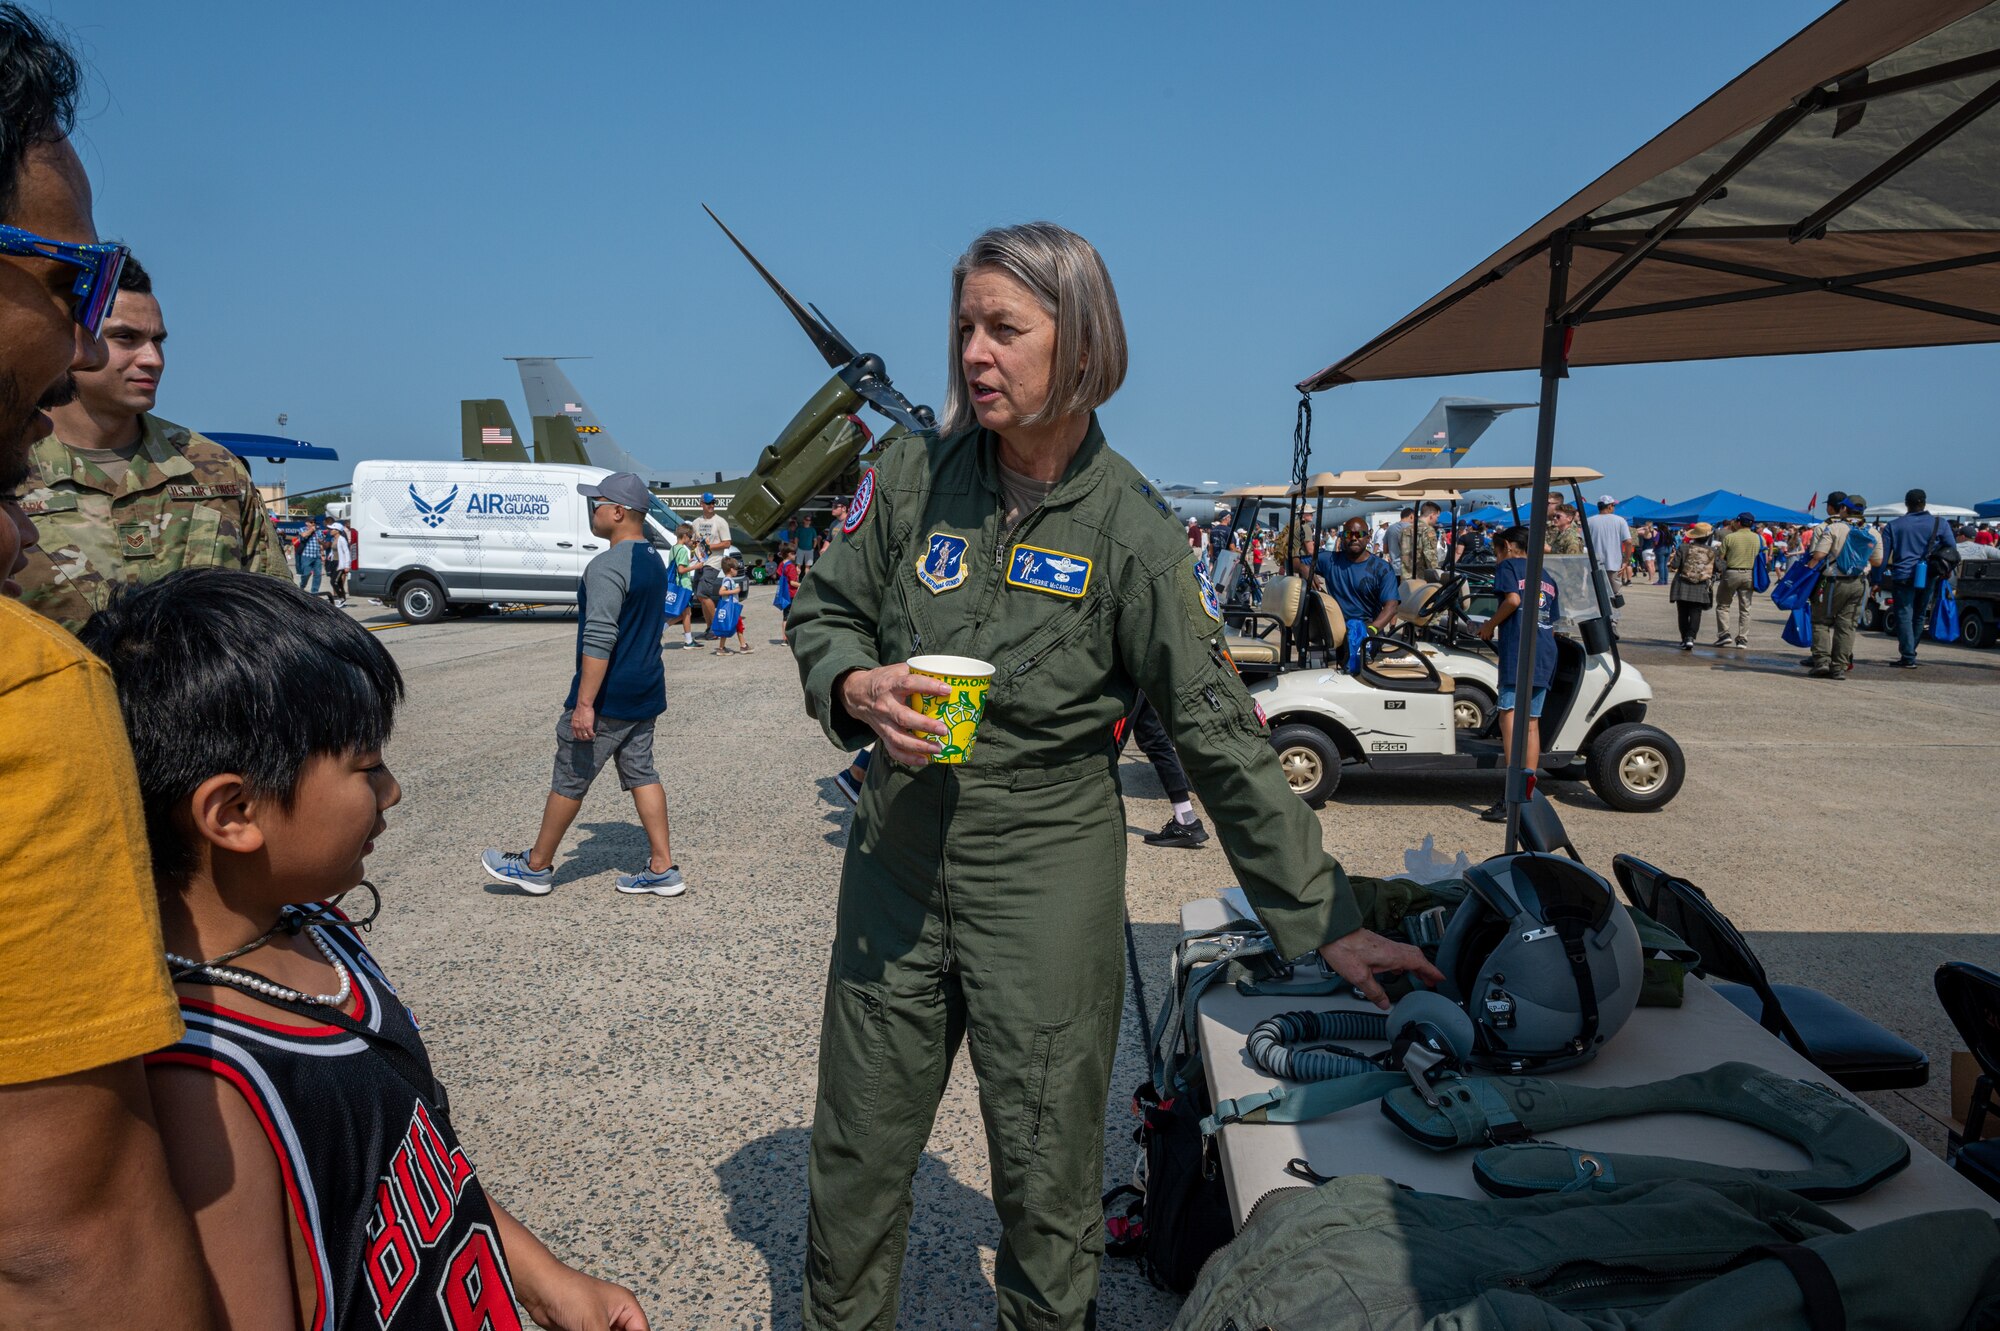 This year’s expo theme is "Innovate, Accelerate, Thrive...the Air Force at 75." The program of events included aerial demonstrations, aircraft static displays, vendors, and meet and greets.